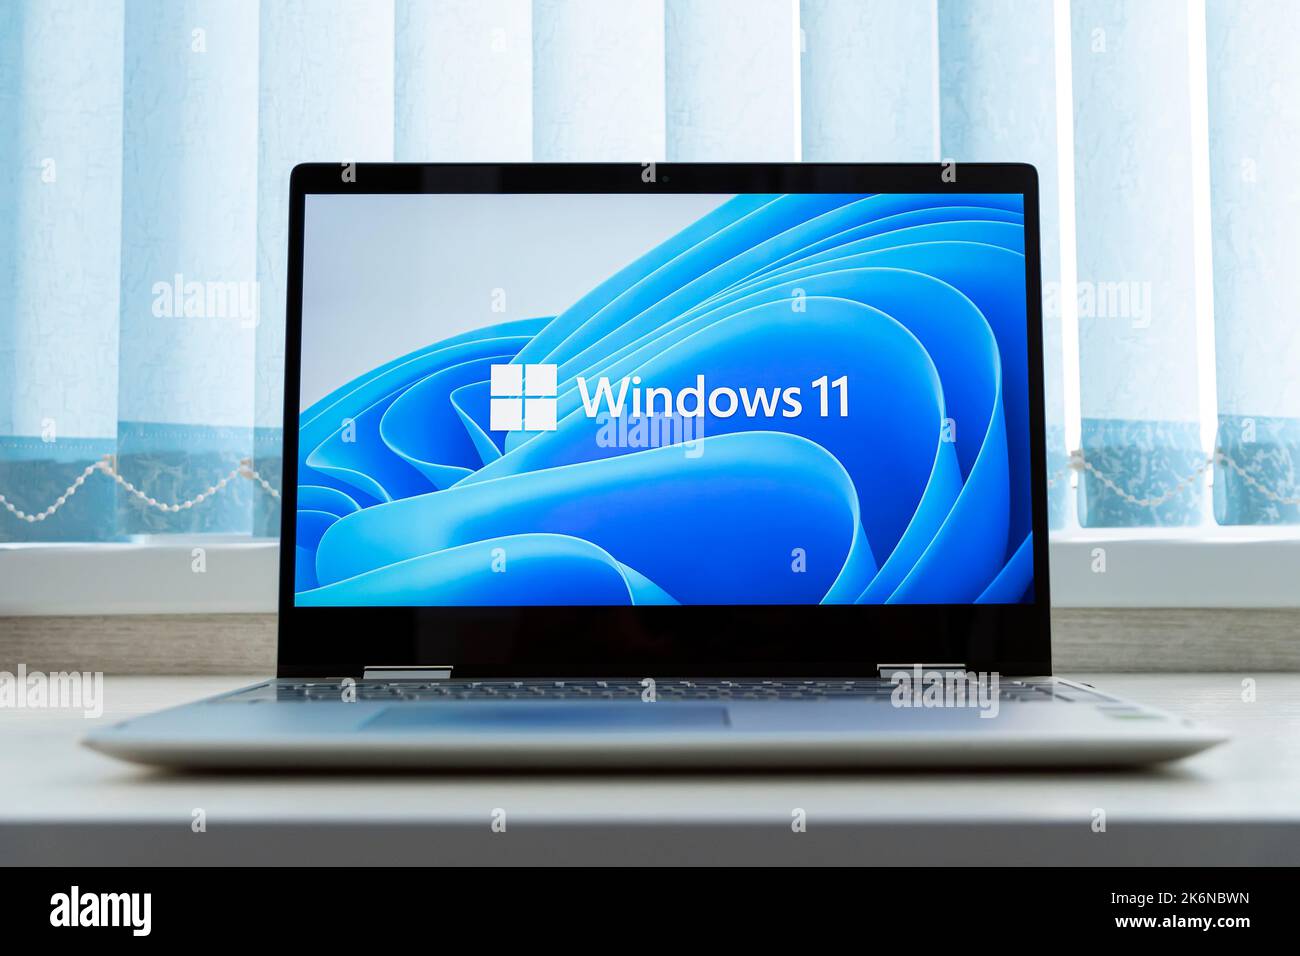 November 2, 2021. Barnaul, Russia. Windows 11 logo on laptop screen. A new operating system update from Microsoft Stock Photo